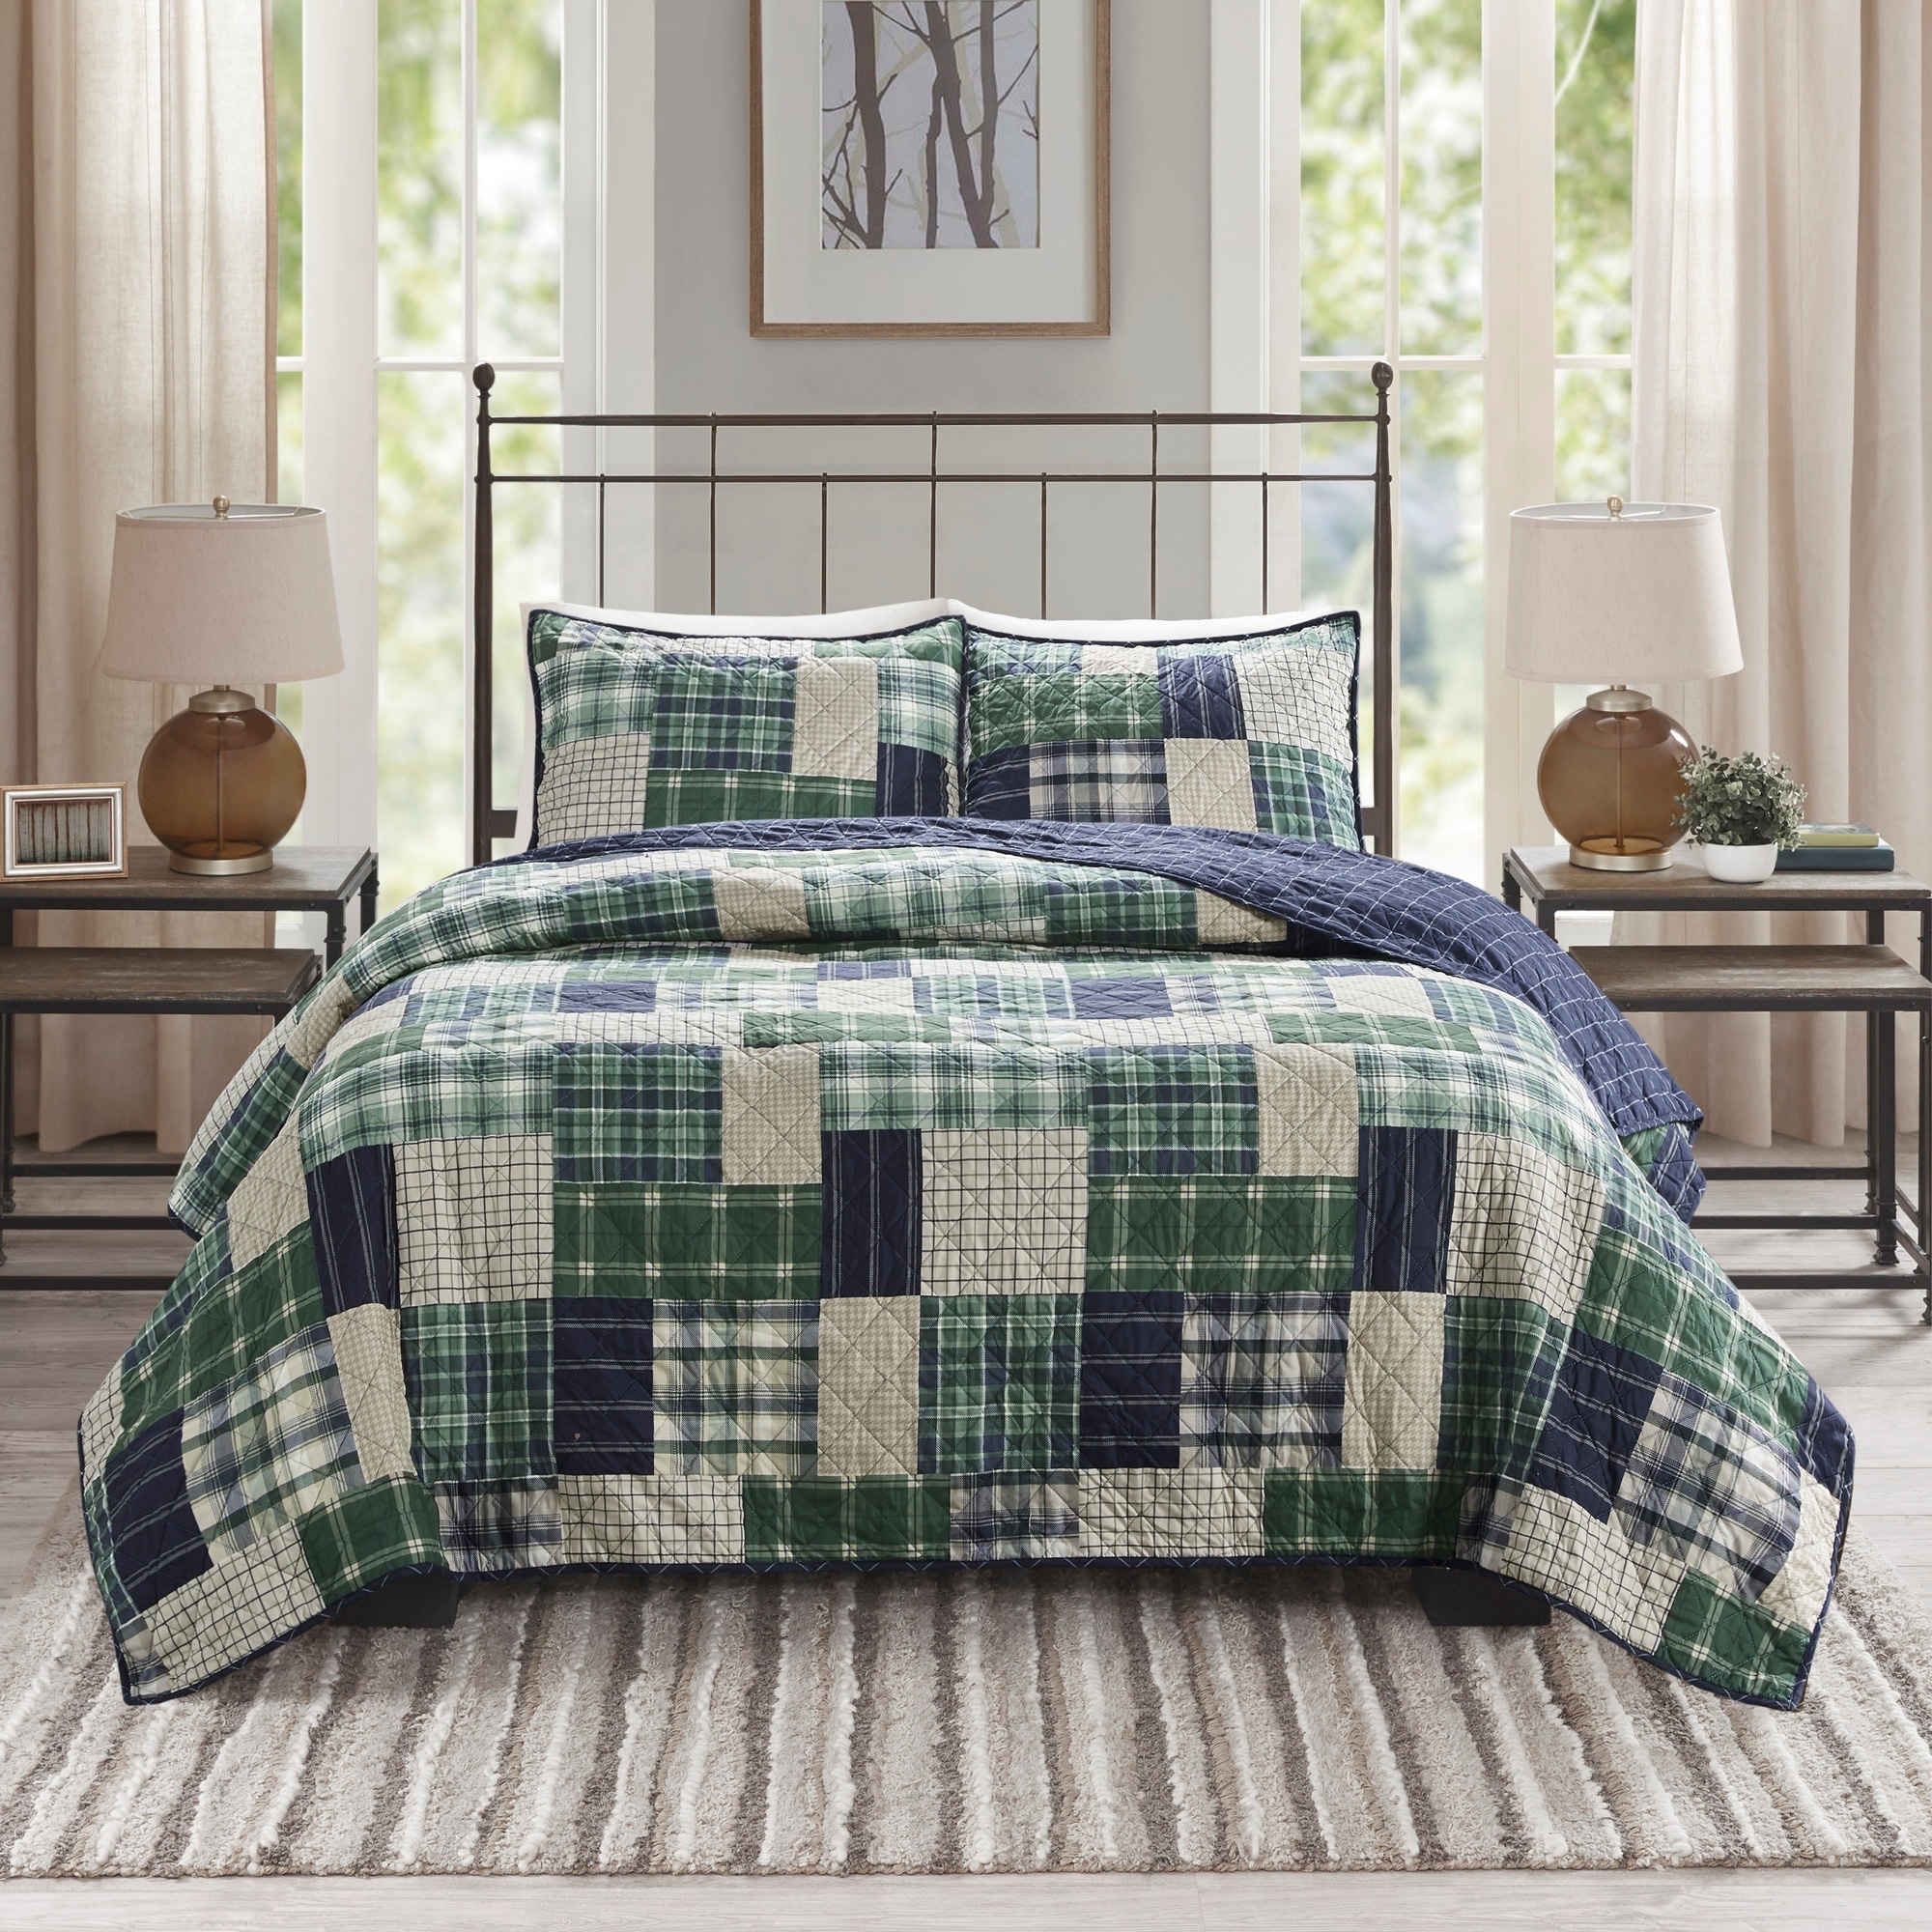 Southwestern Quilts and Bedspreads - Bed Bath & Beyond